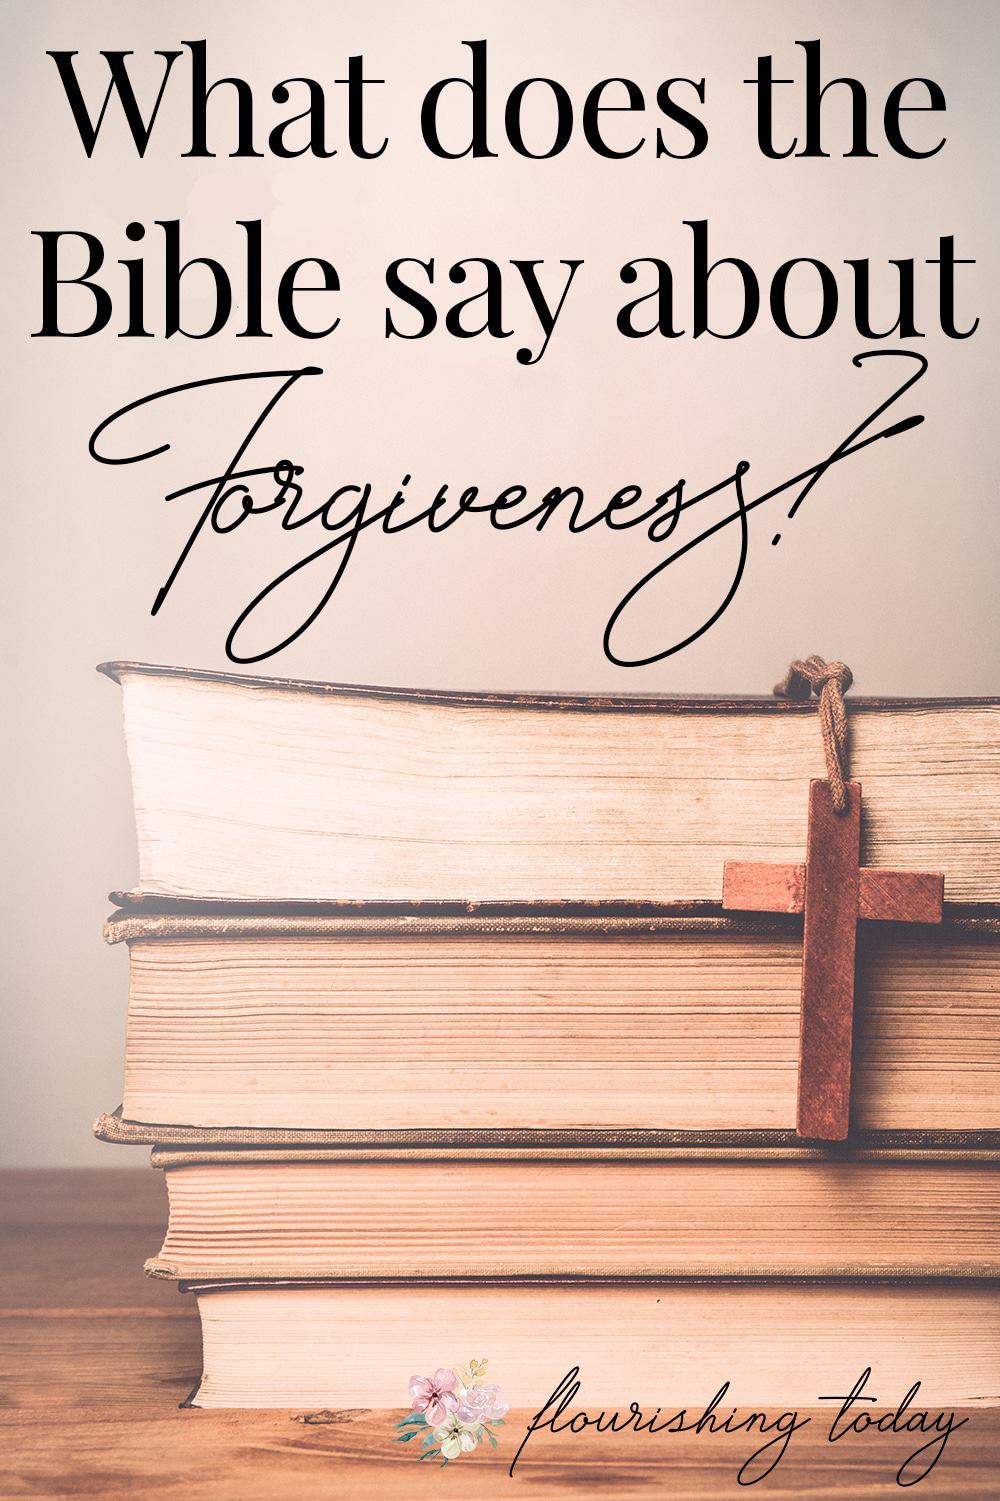 What does the Bible say about #forgiveness? Learn lessons from scripture on the power of forgiveness and how it will heal you and your relationships. #forgivenesslessons #forgivenessscriptures #scriptures #bibleverses #relationships #powerofforgiveness #bibleversesonforgiveness